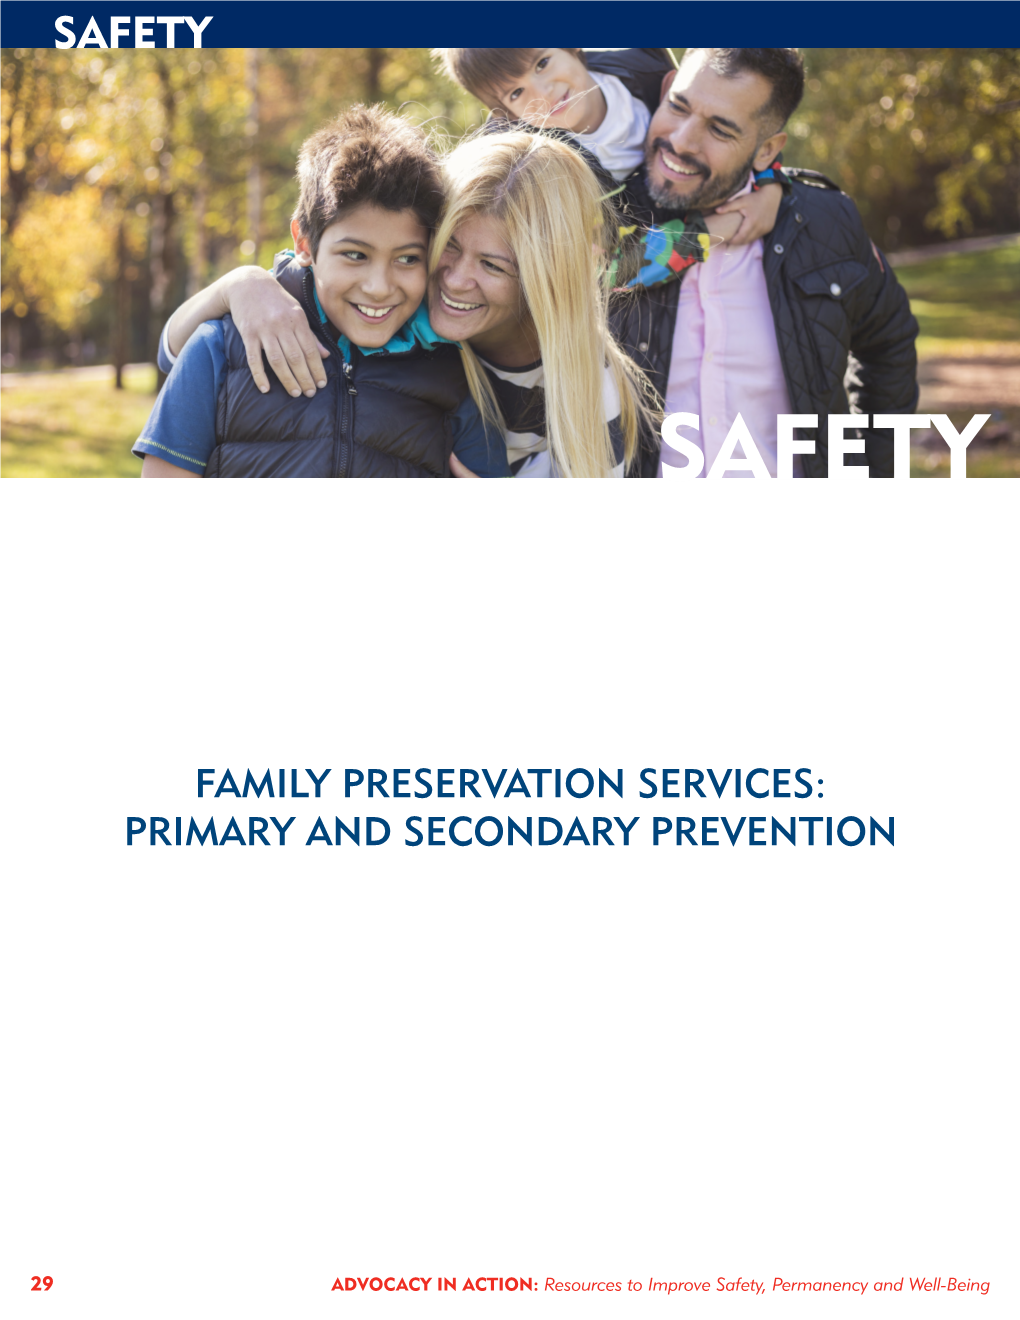 Family Preservation Services: Primary and Secondary Prevention